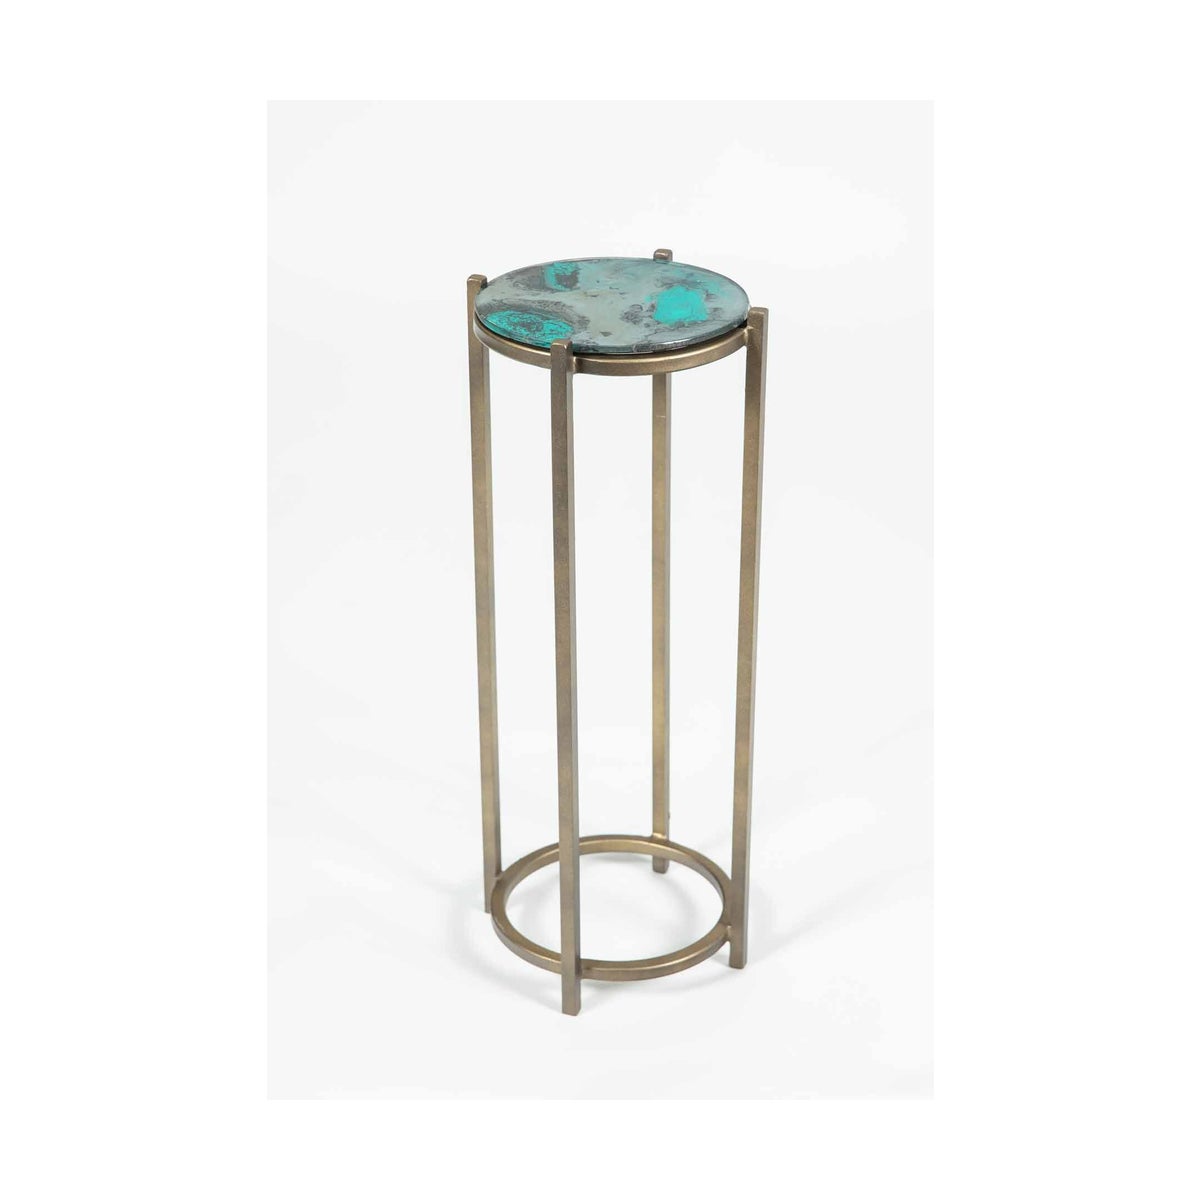 Quinn Accent Table in Antique Brass w/ Top in Dew Drop Finish